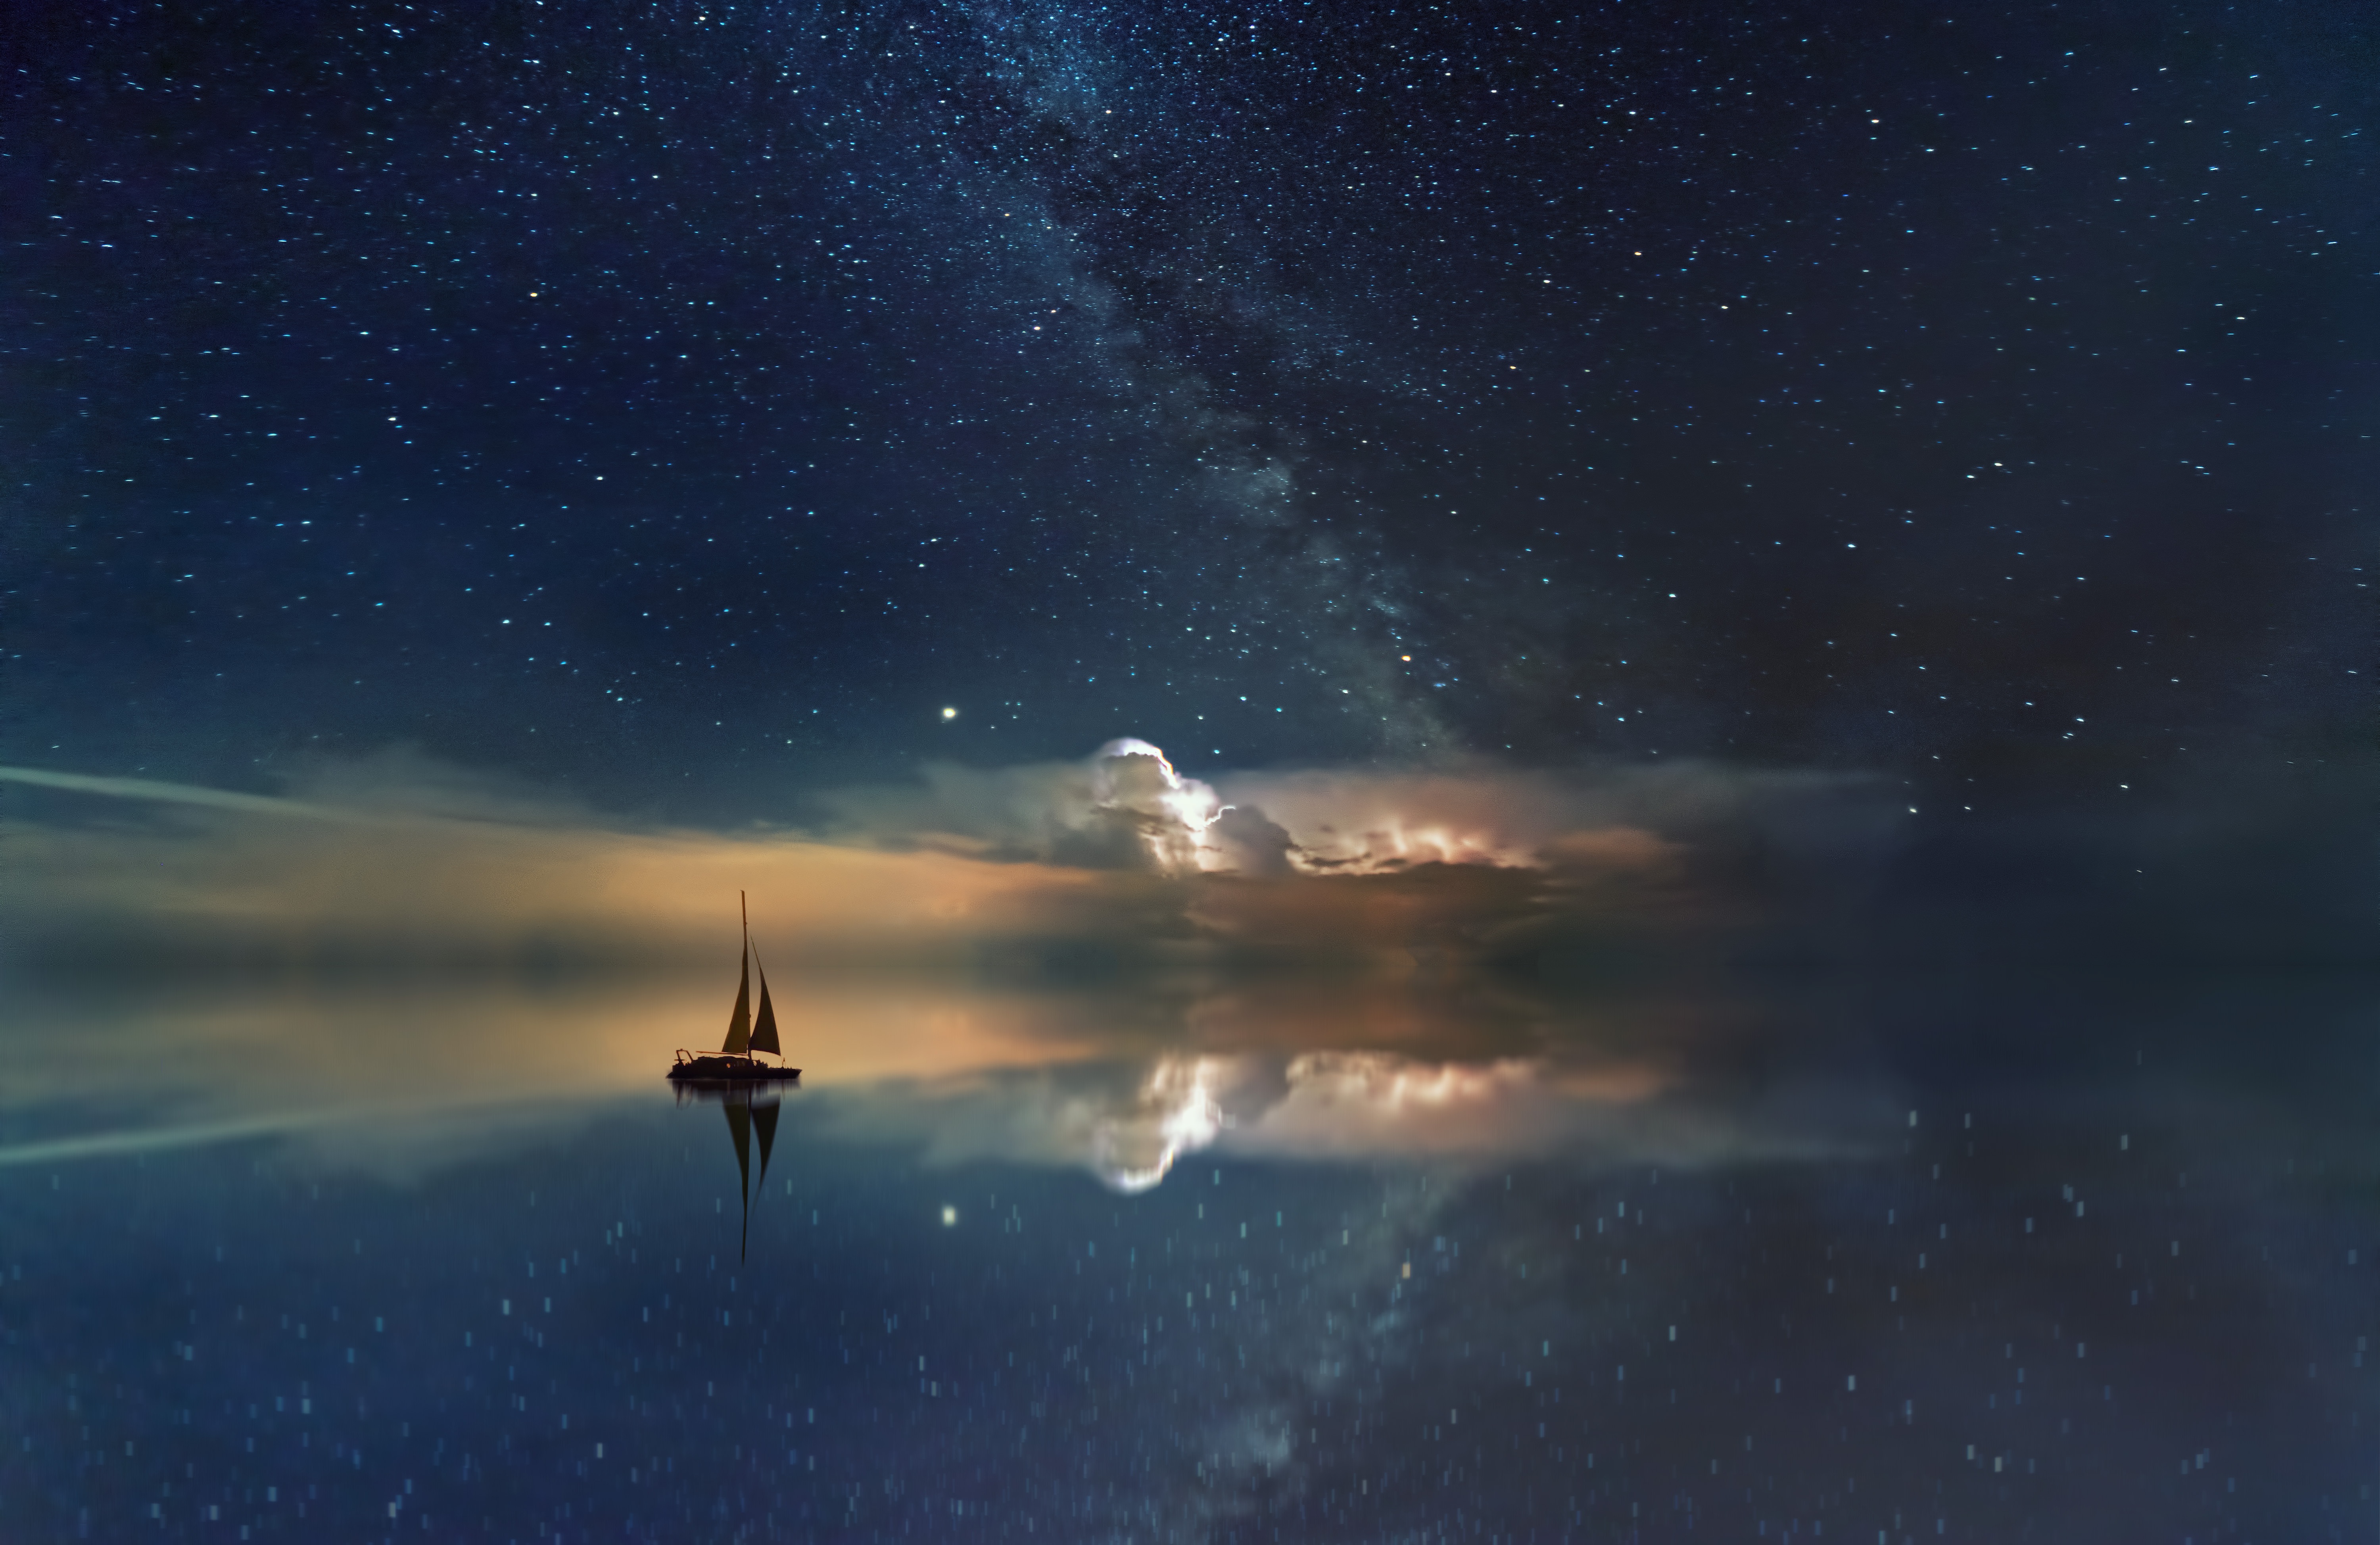 nature, sail, night, reflection, starry sky, boat